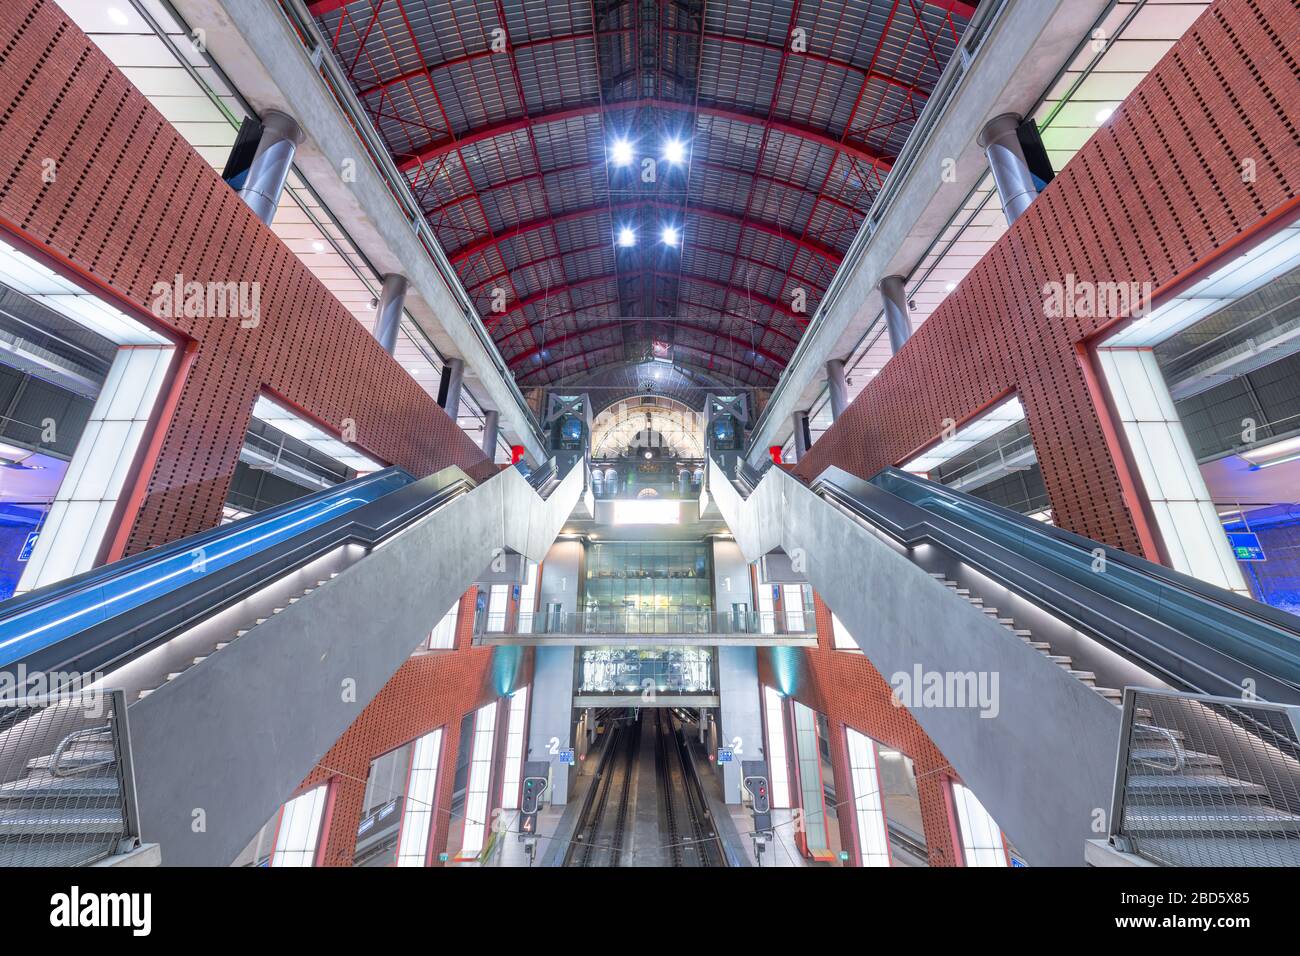 ANTWERP, BELGIUM - MARCH 5, 2020: Antwerpen-Centraal Railway Station escalators and platforms. The station dates from 1905. Stock Photo